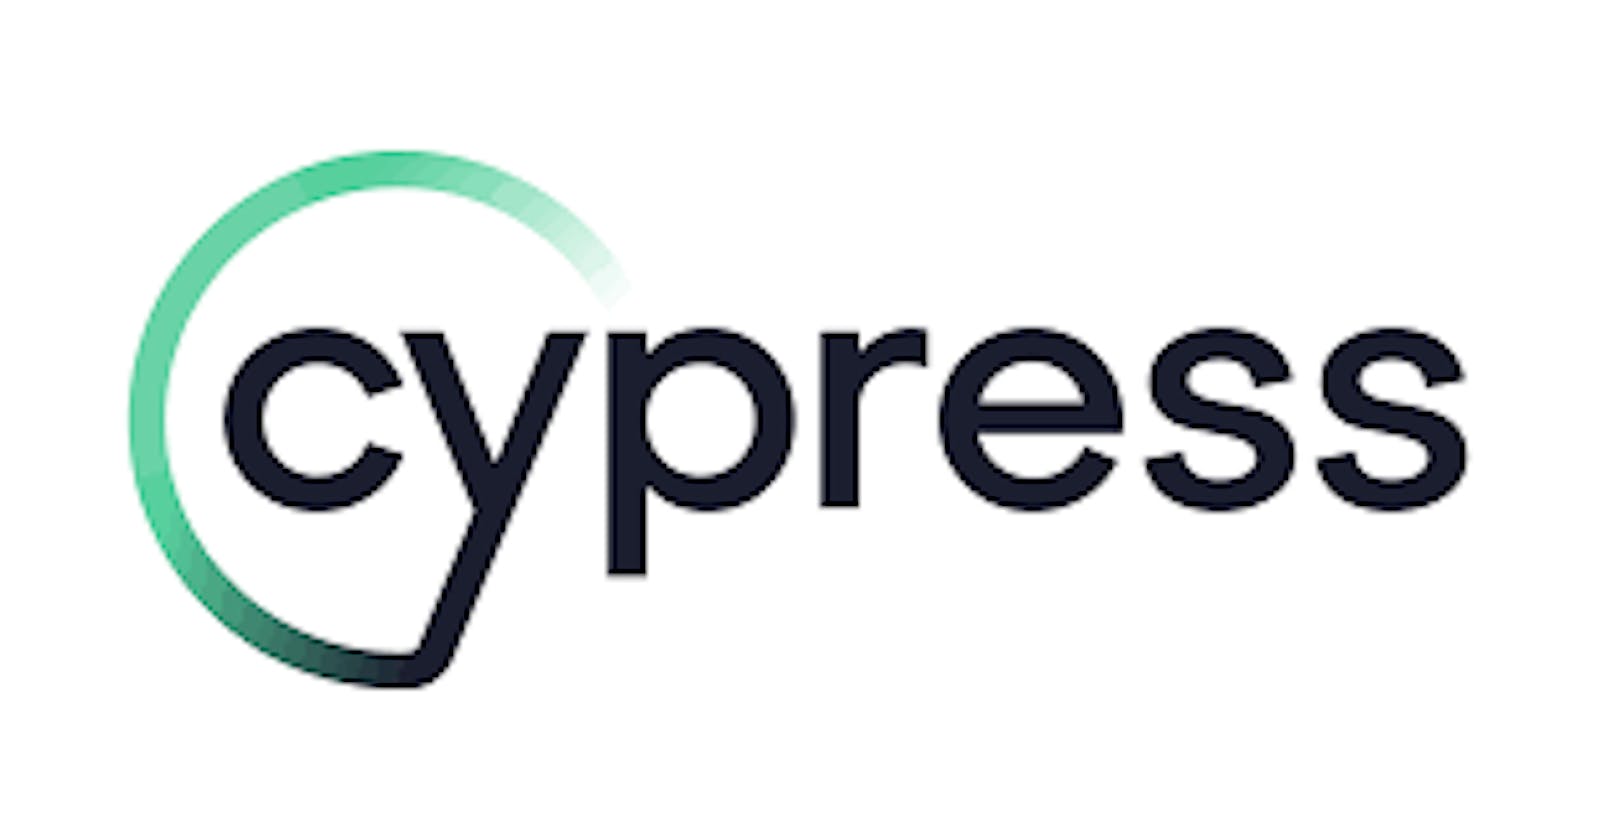 How to Run Cypress Tests in Parallel in Github Actions